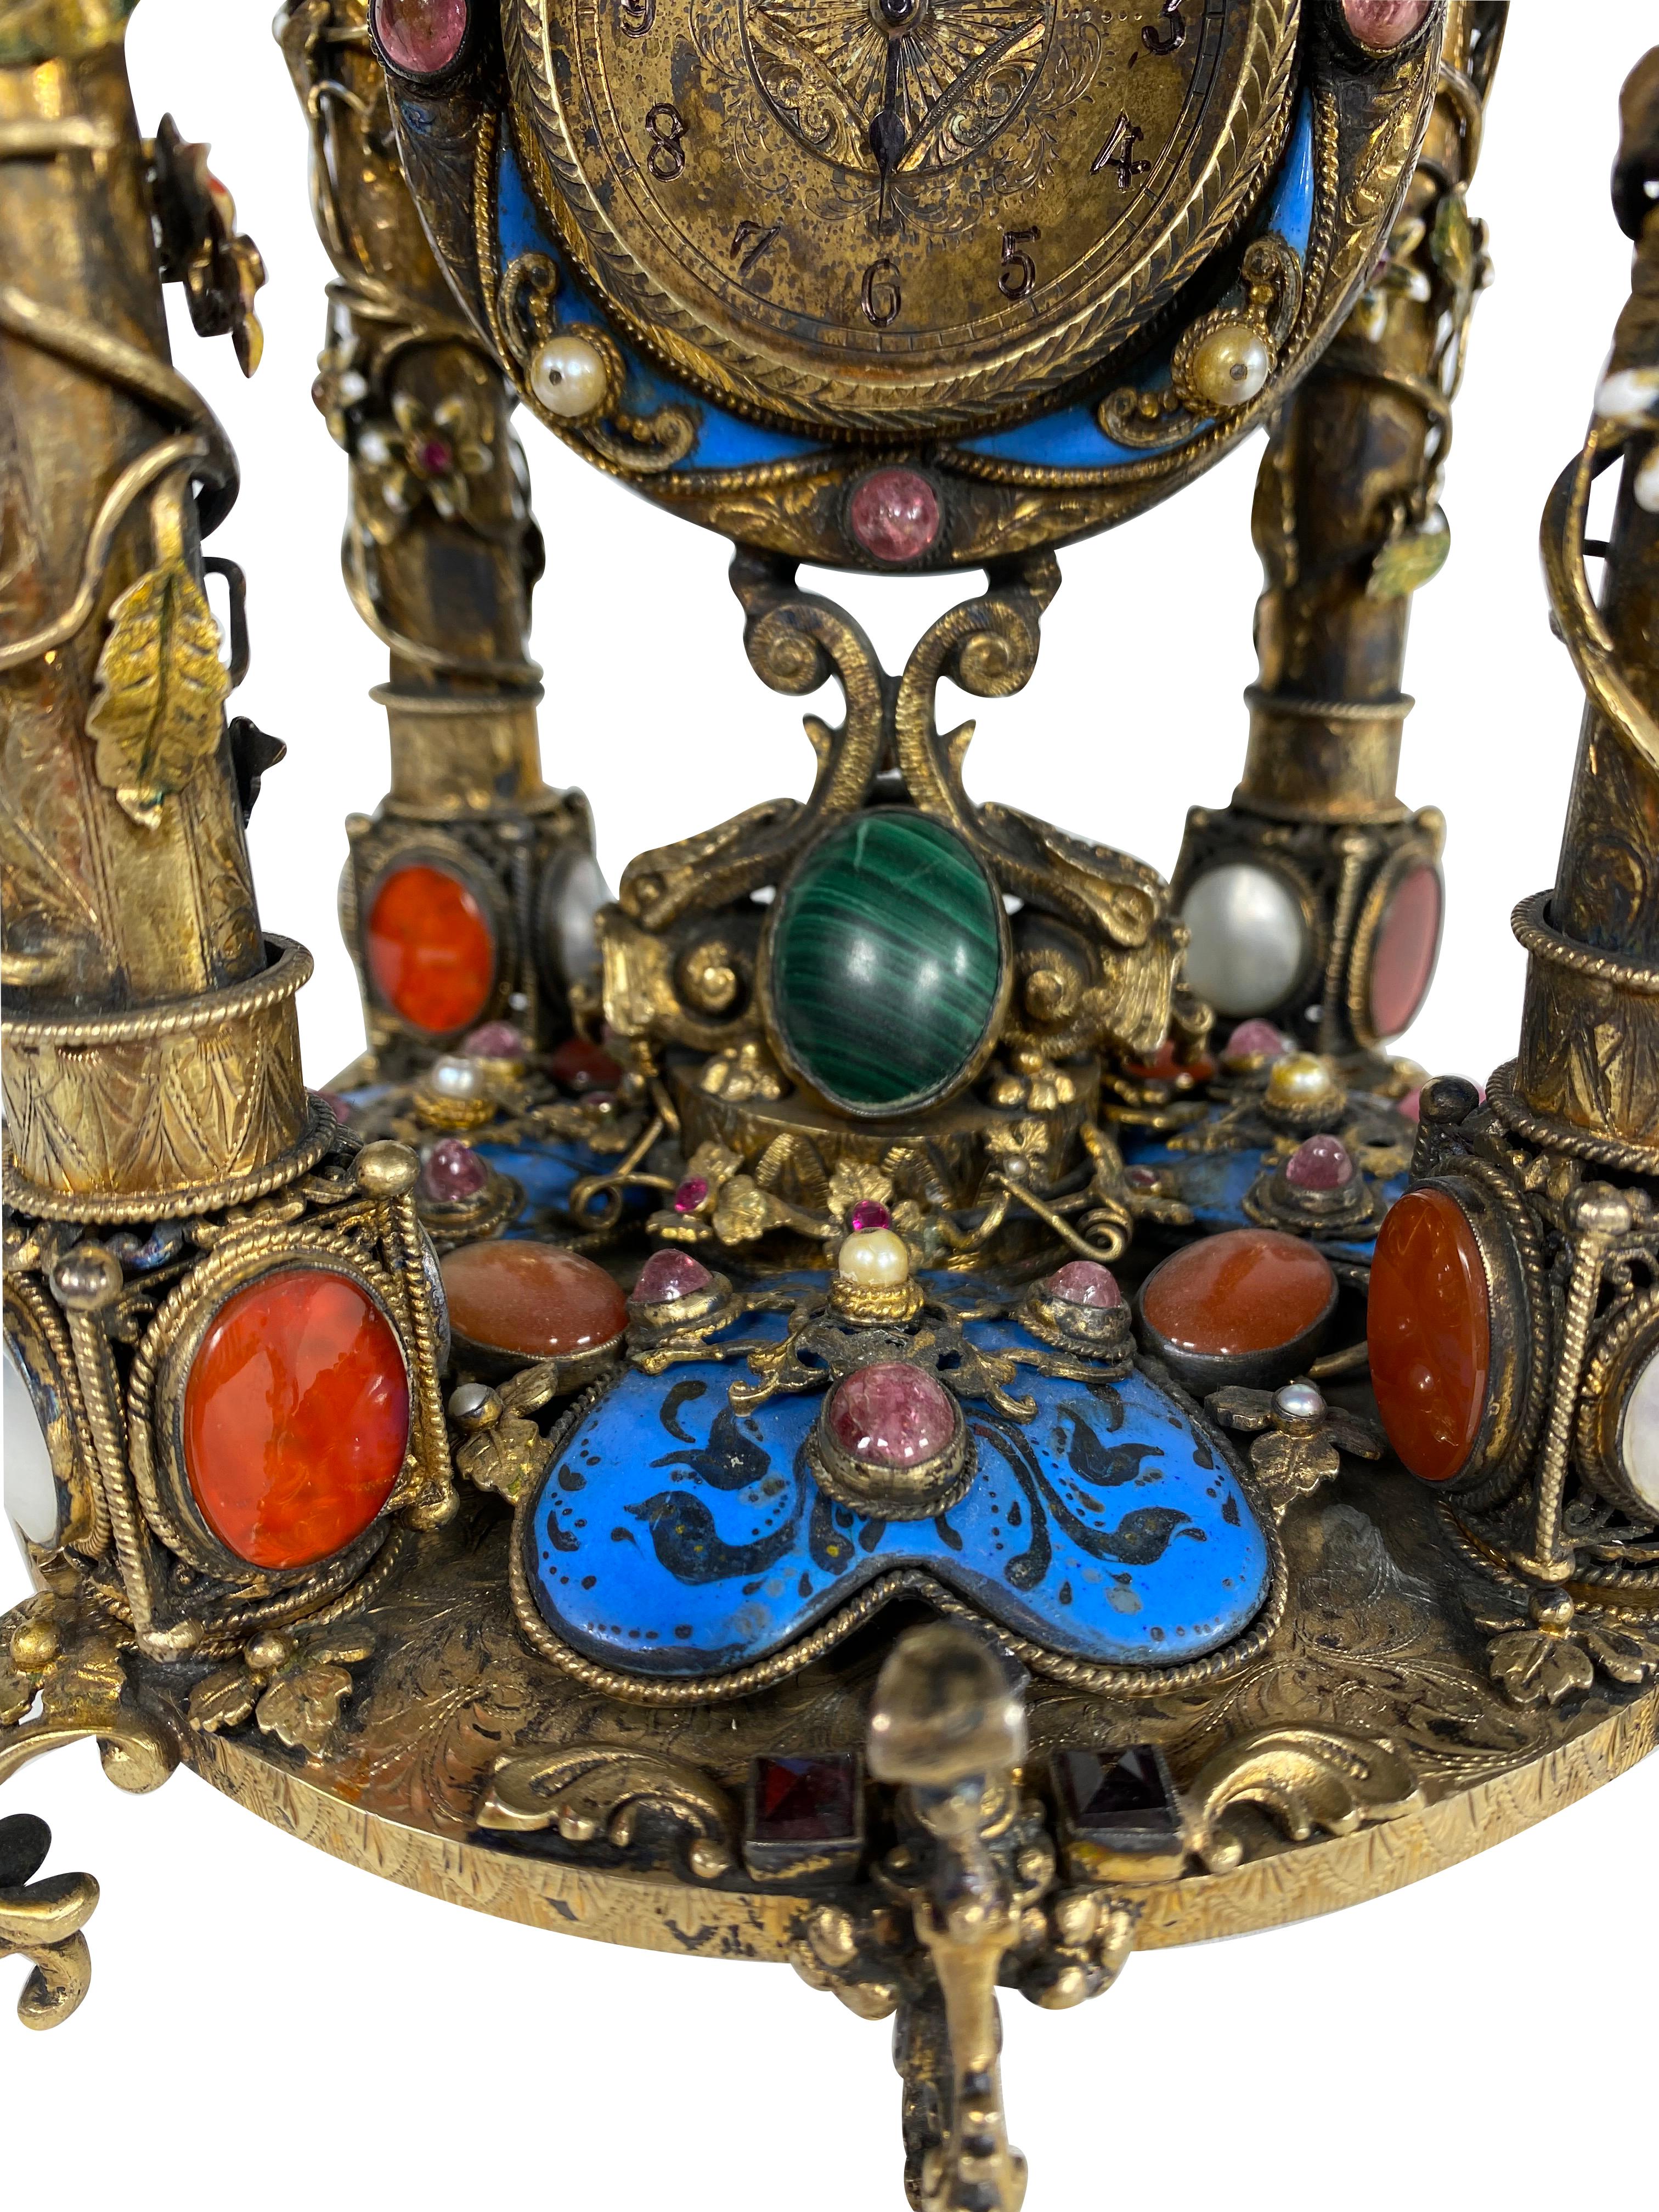 Hand-Crafted A Rare Austro Hungarian Gilt Silver & Jeweled Table Clock, Circa 1900 For Sale